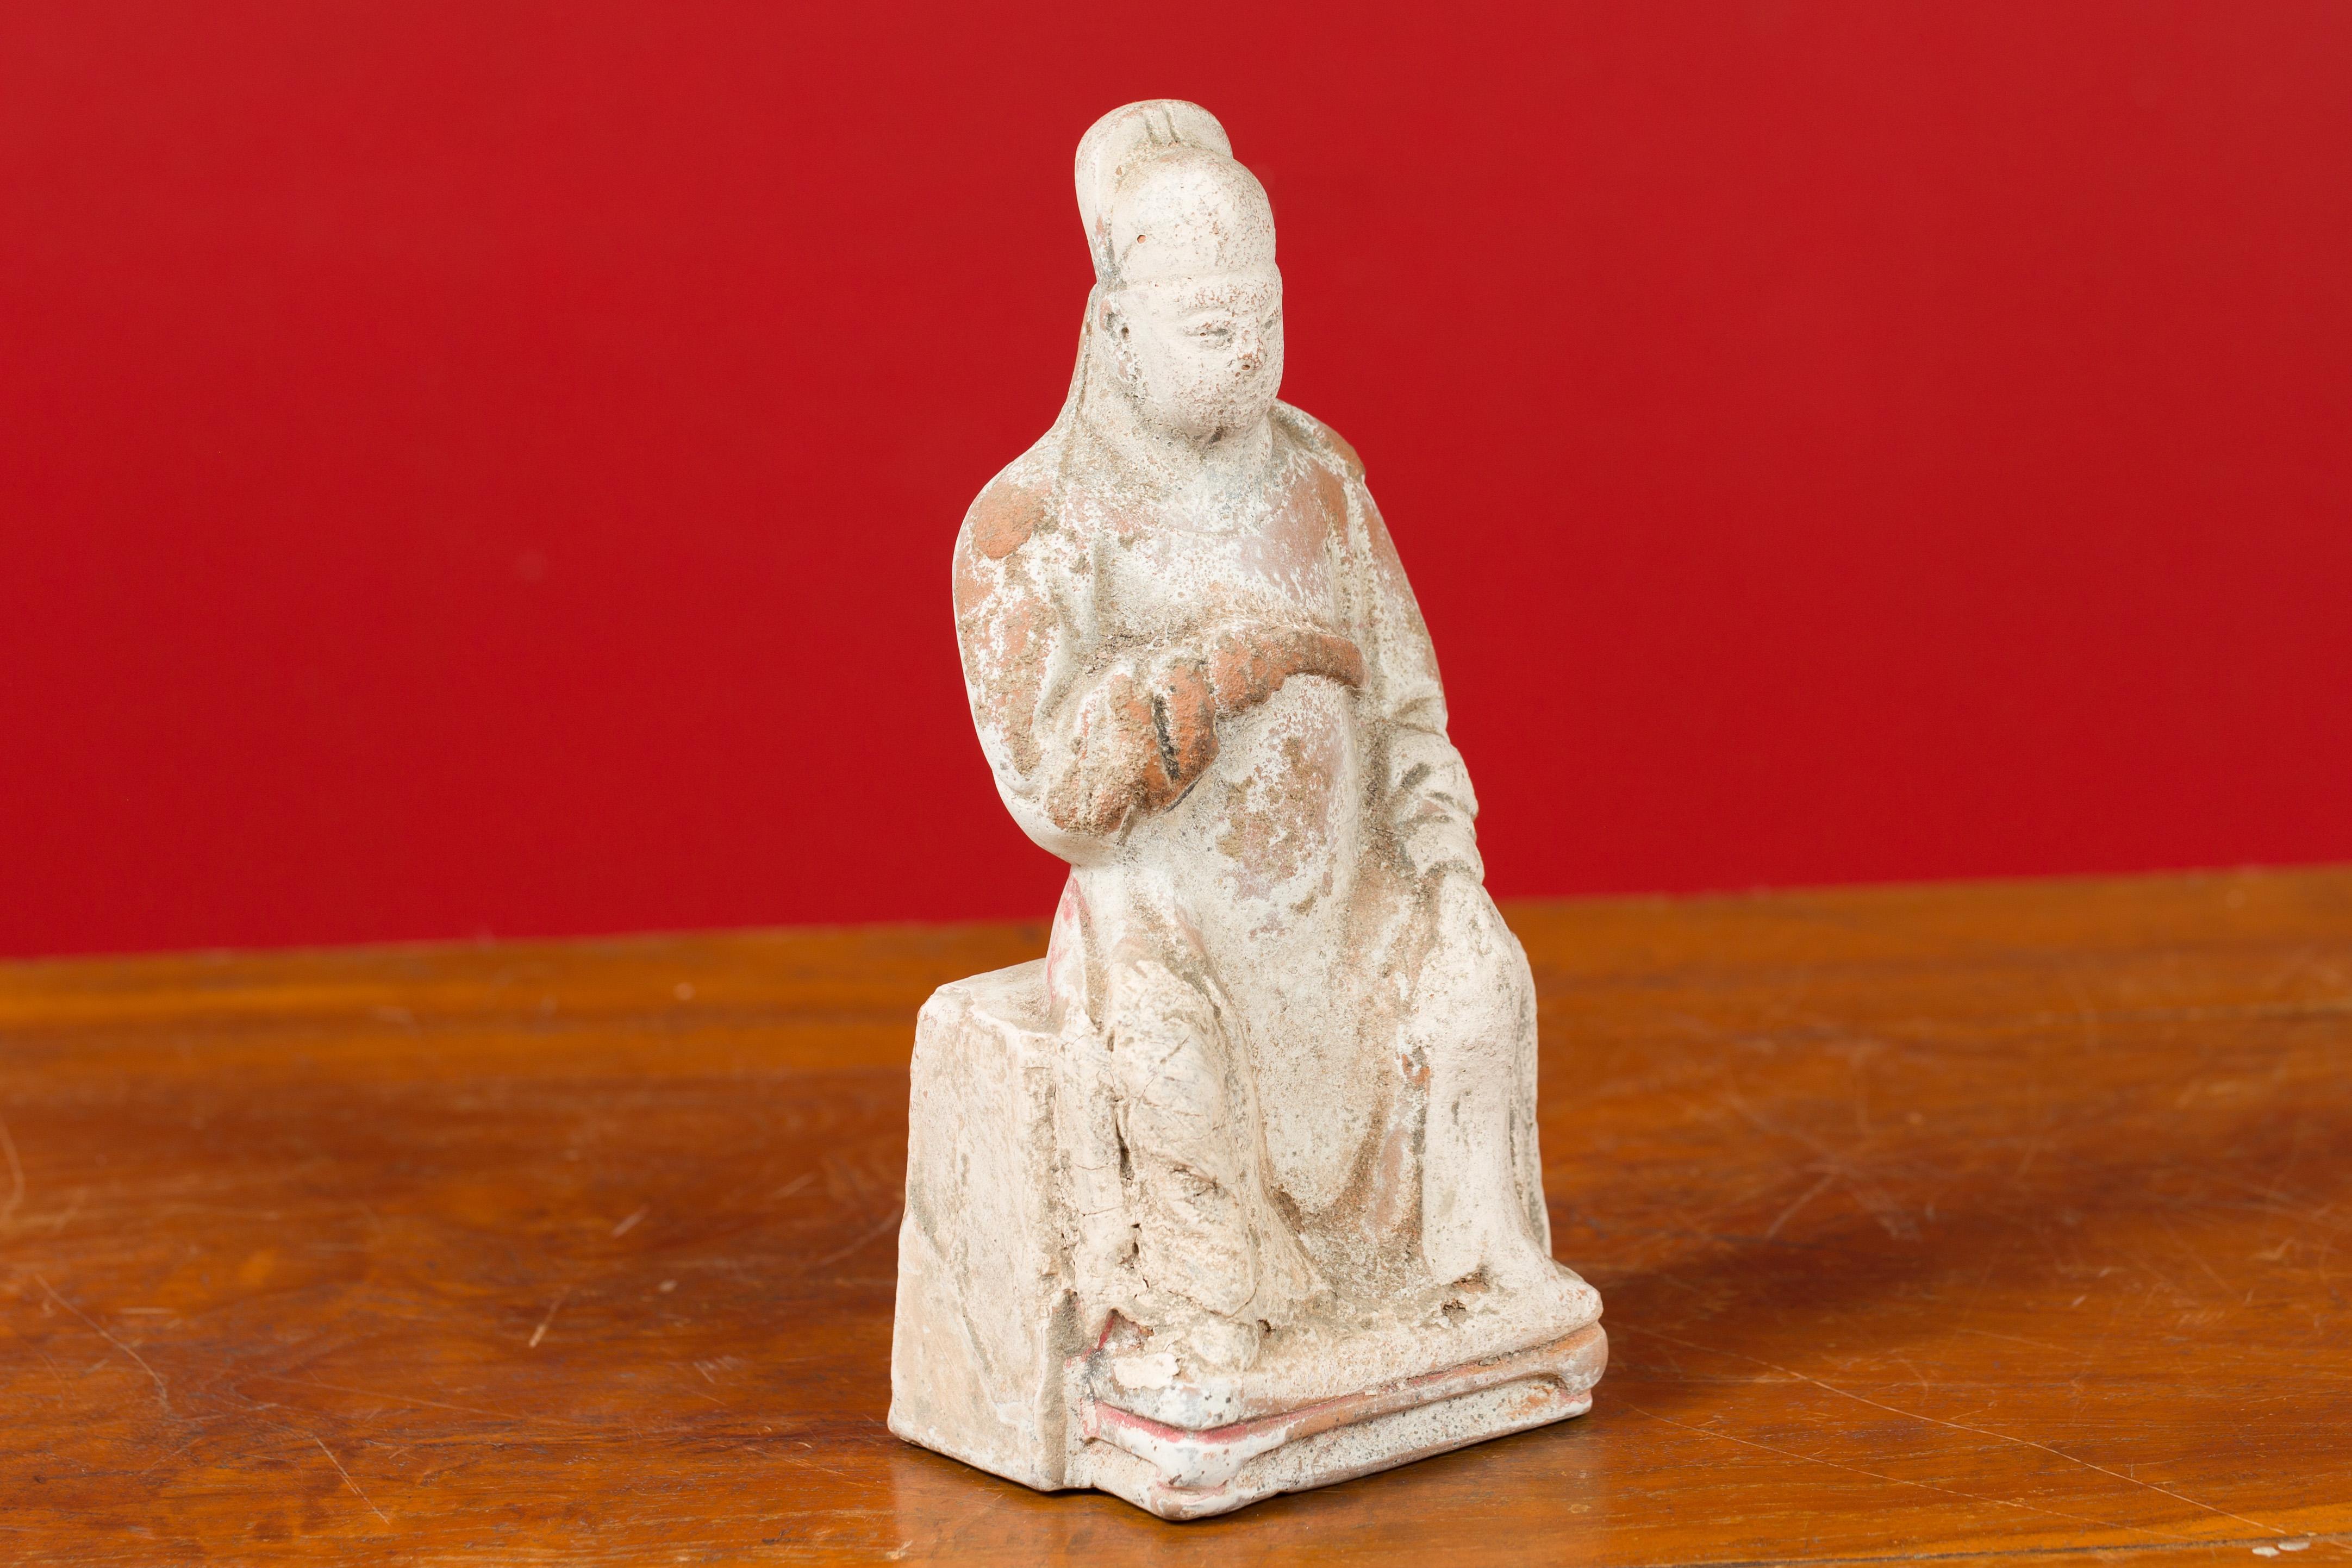 Chinese Han Dynasty Period Terracotta Dignitary Figure with White and Red Paint 2